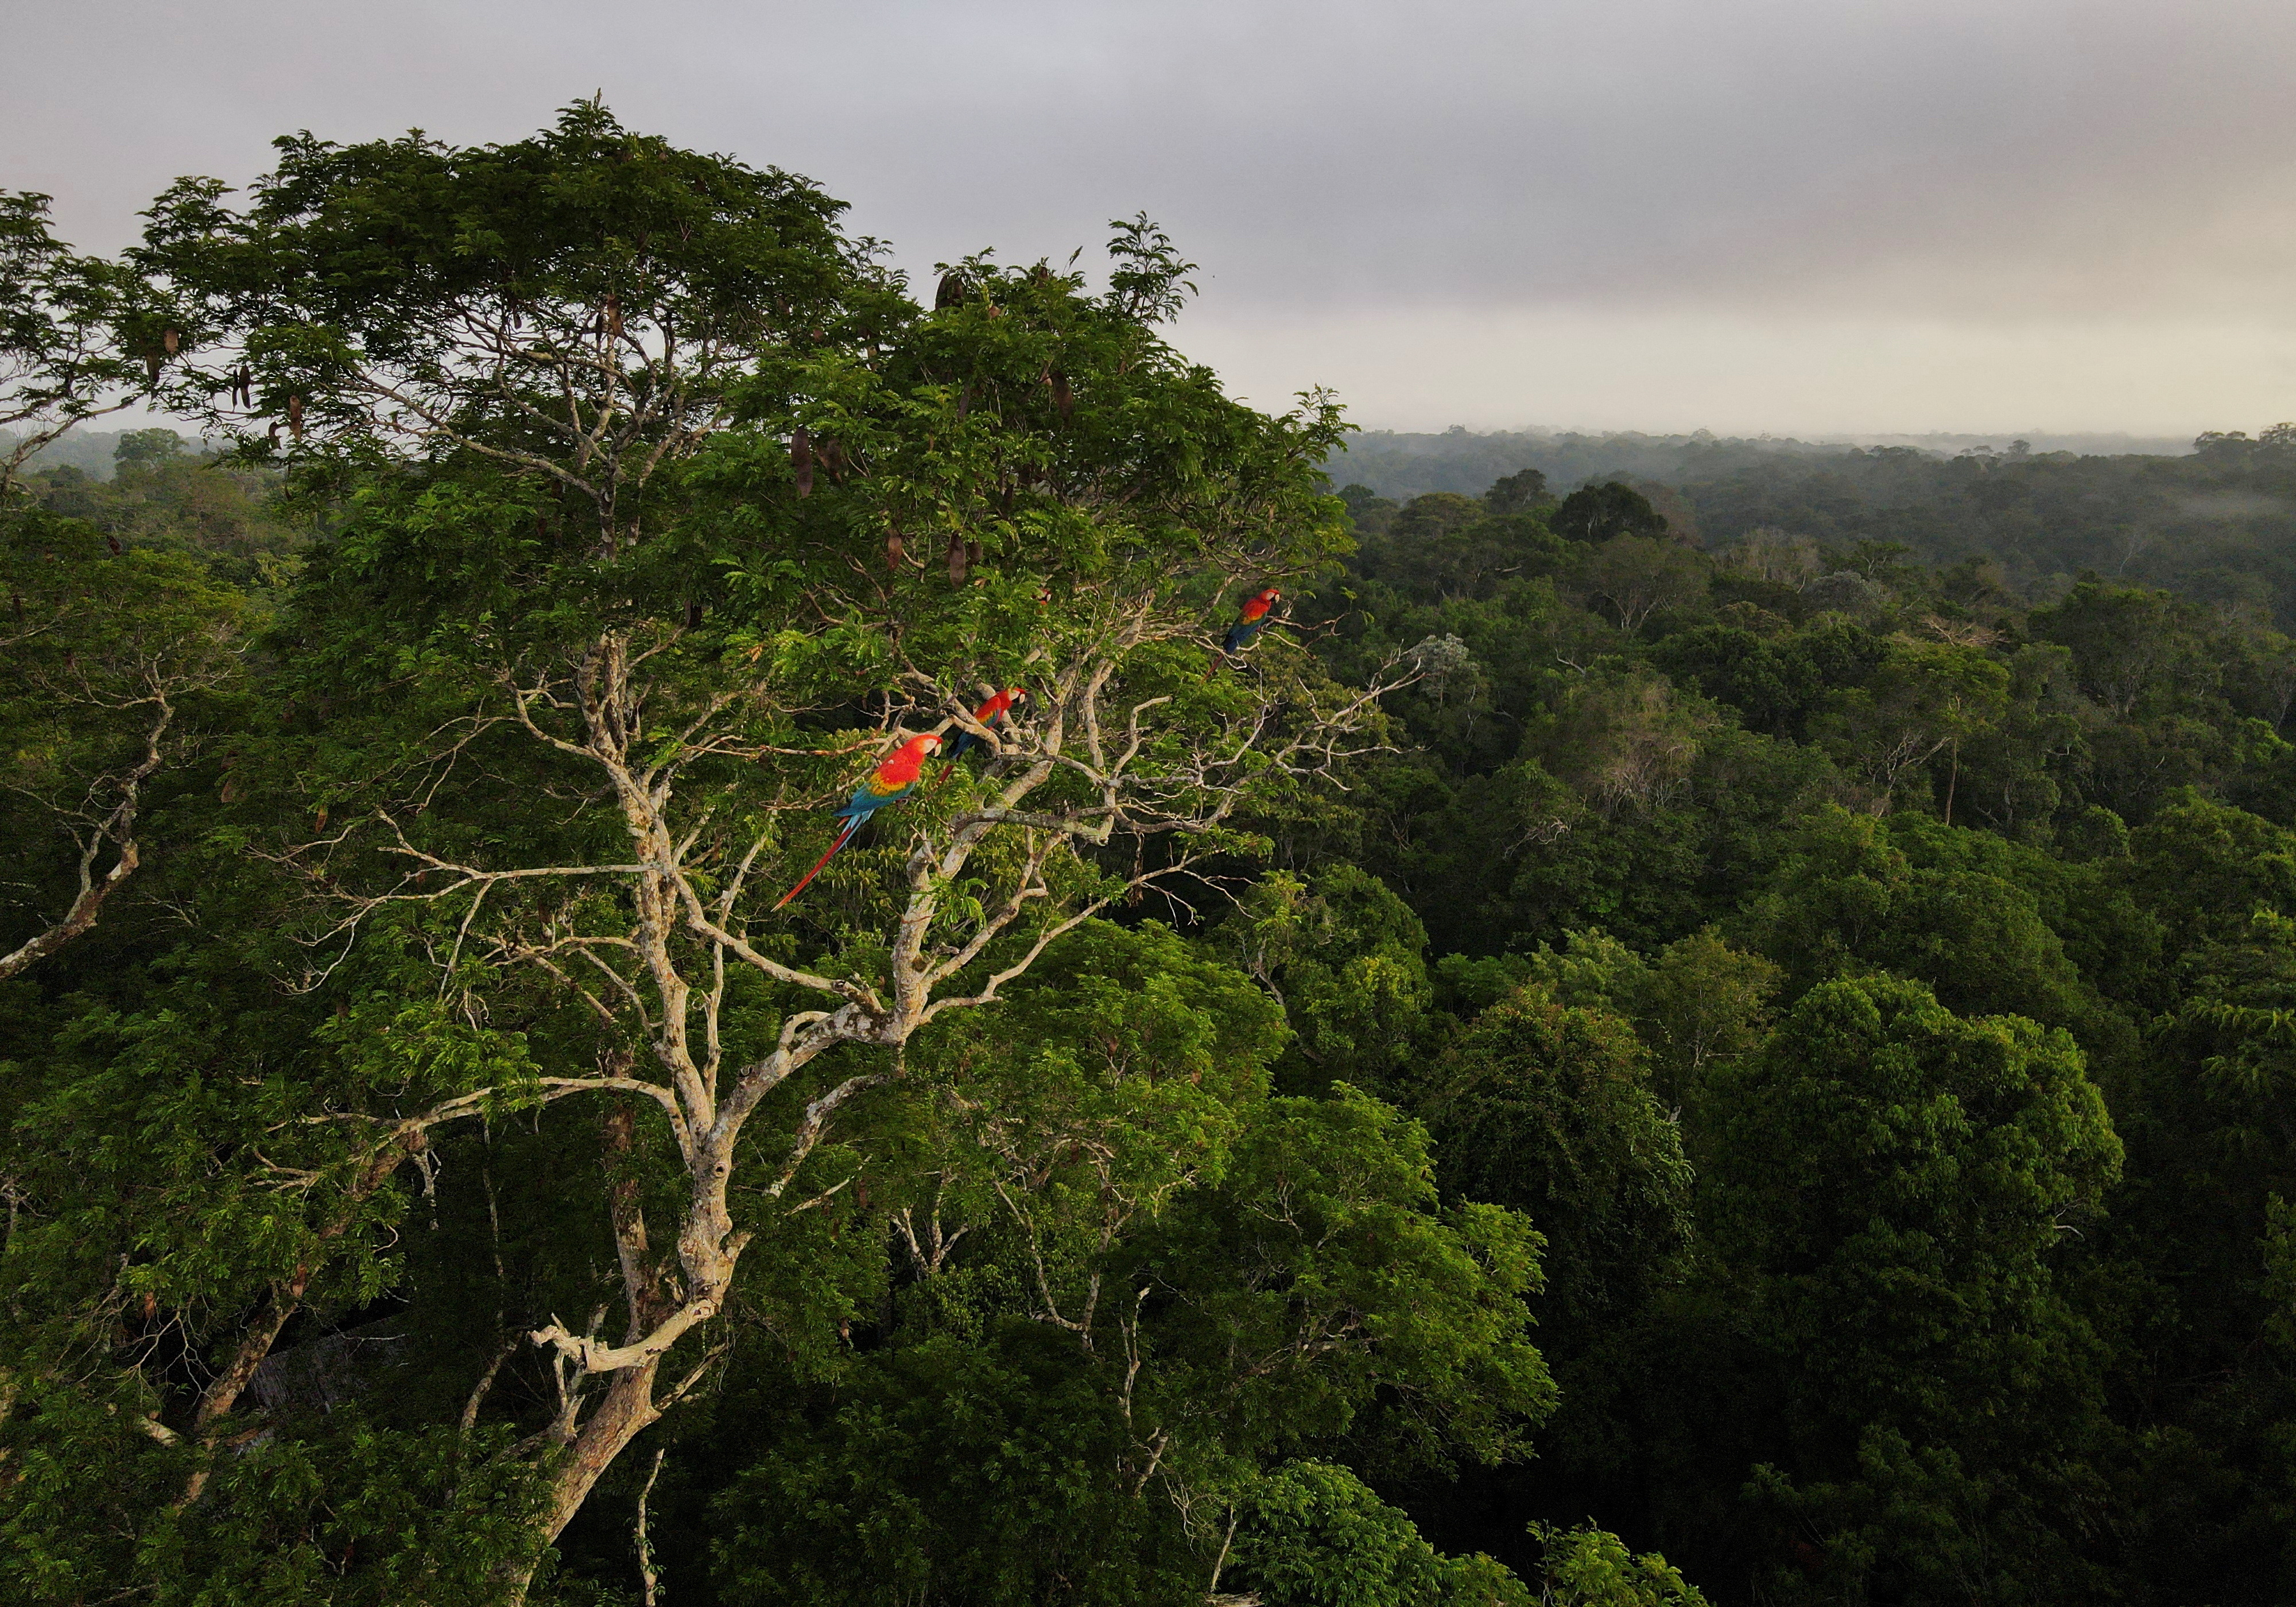 Macaws sit on a tree at the Amazon rainforest in Manaus